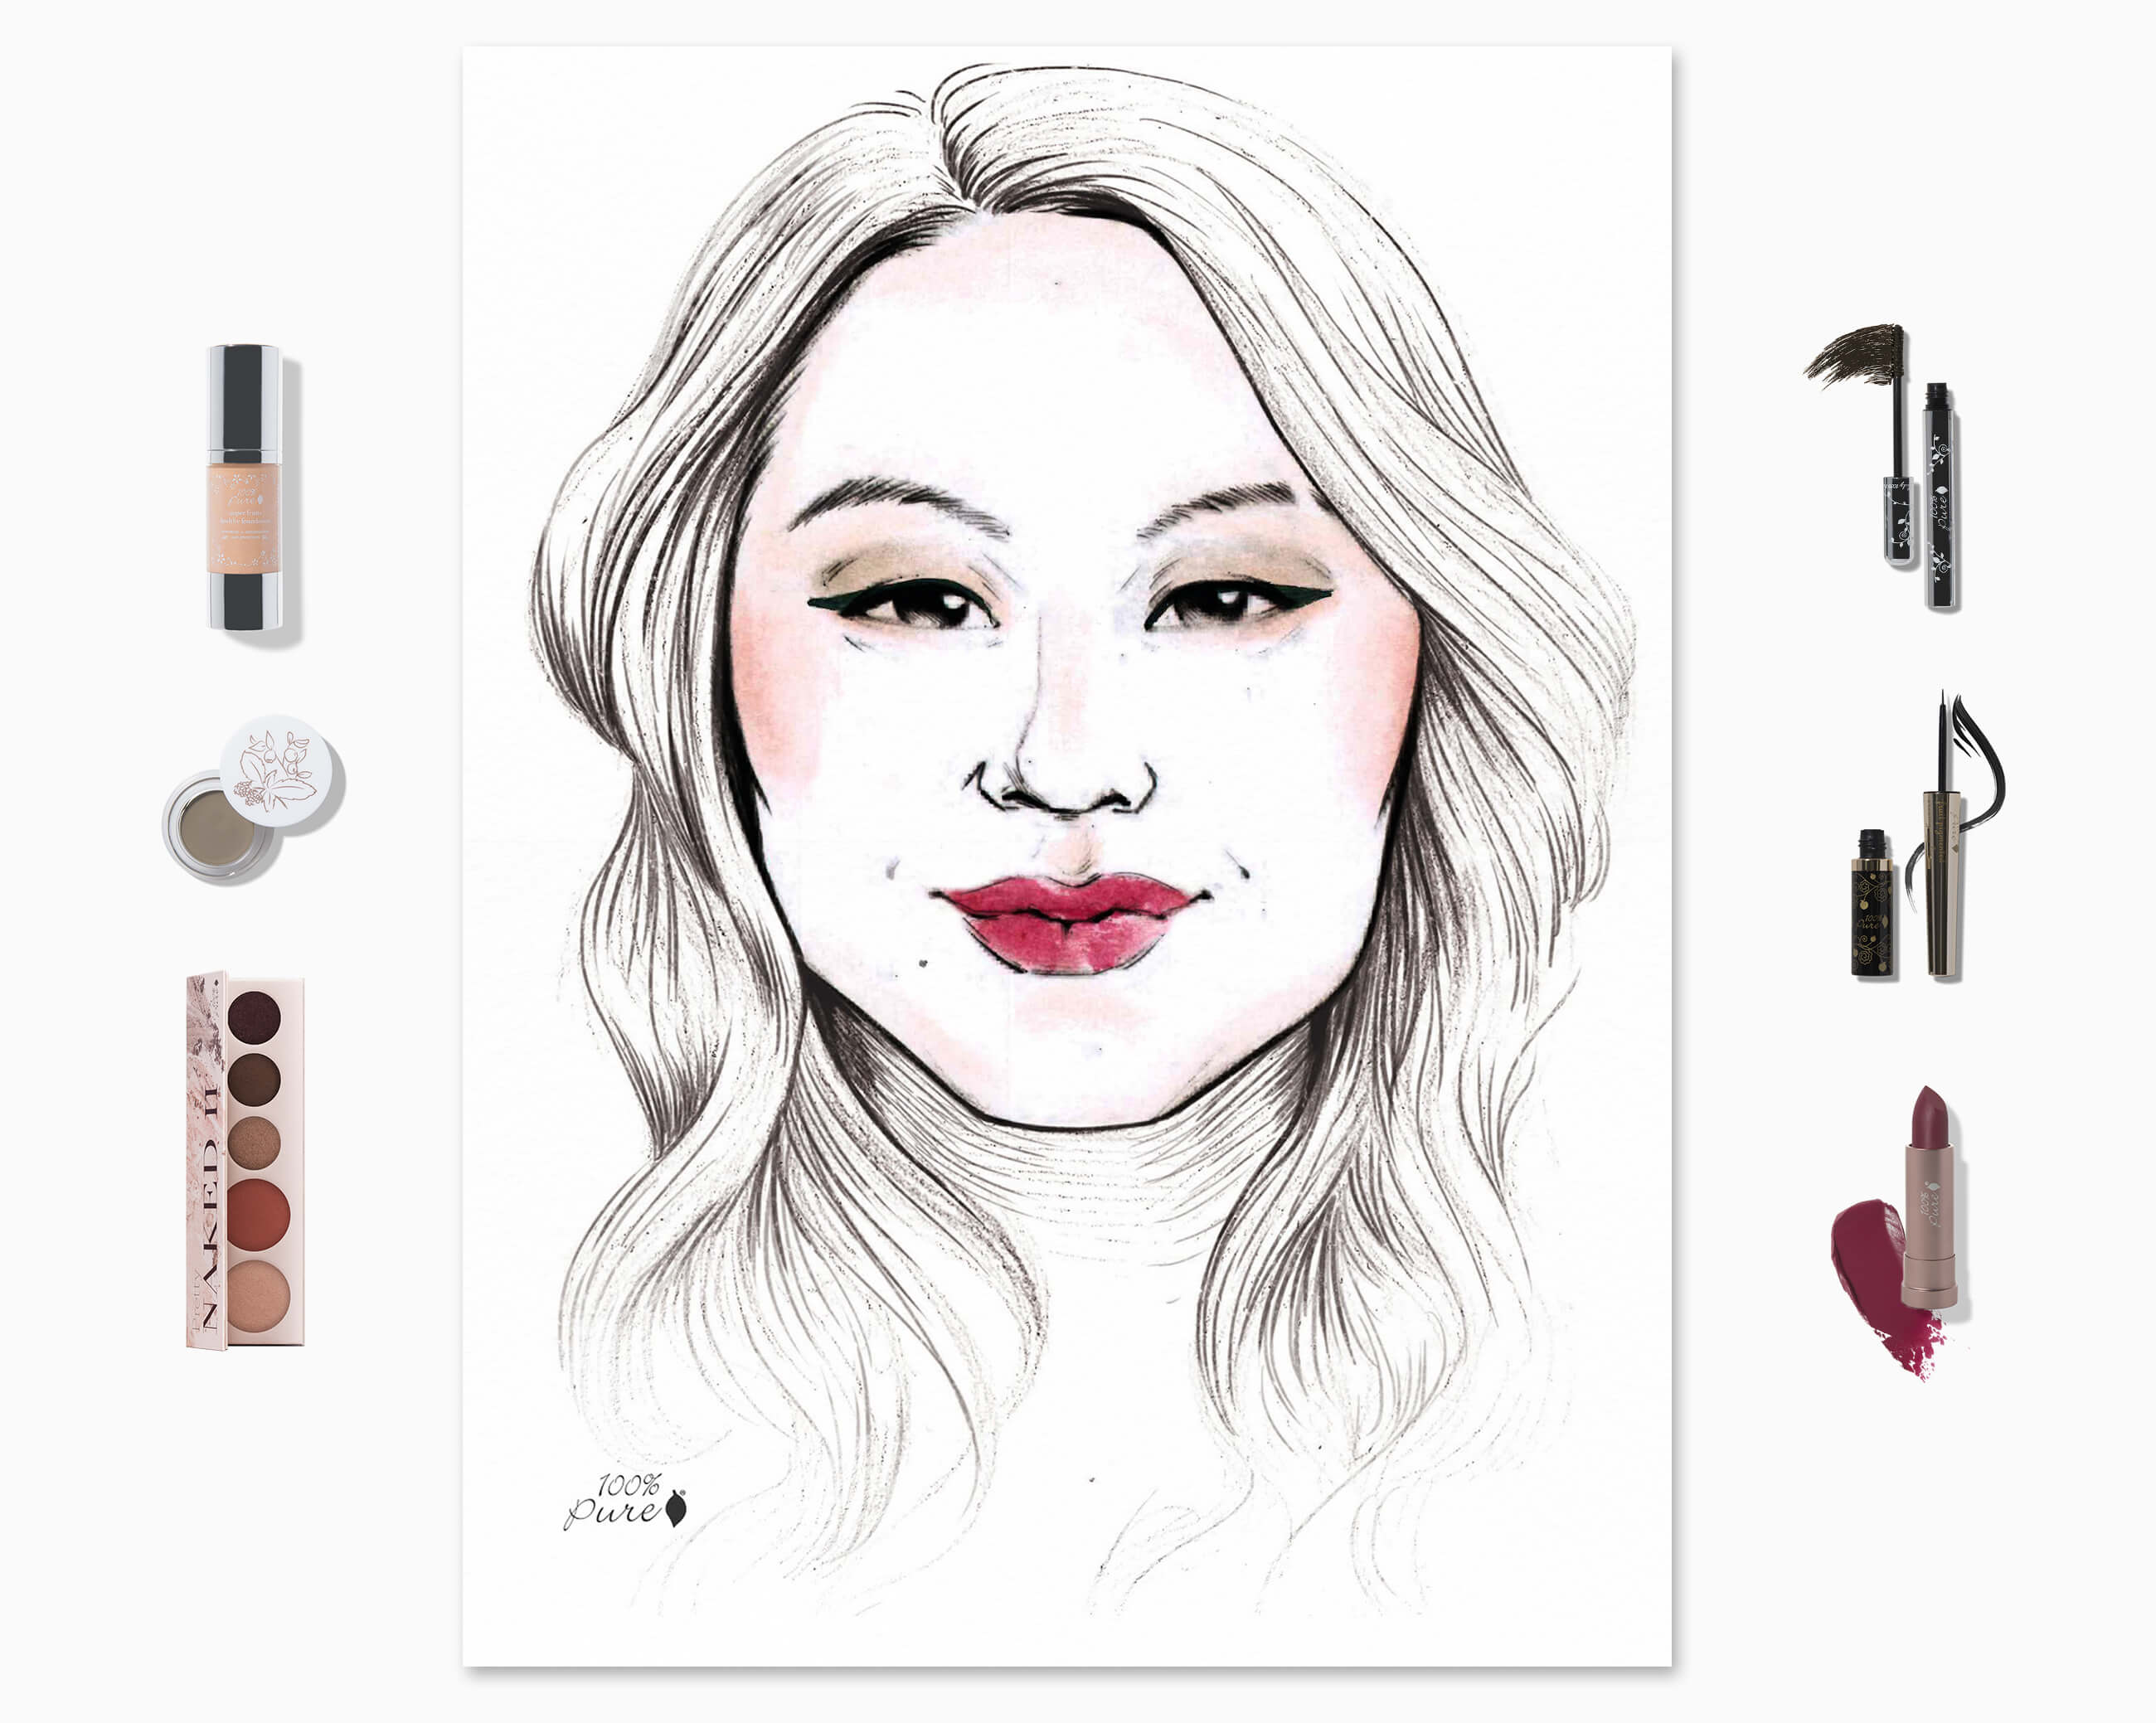 Product Face Chart